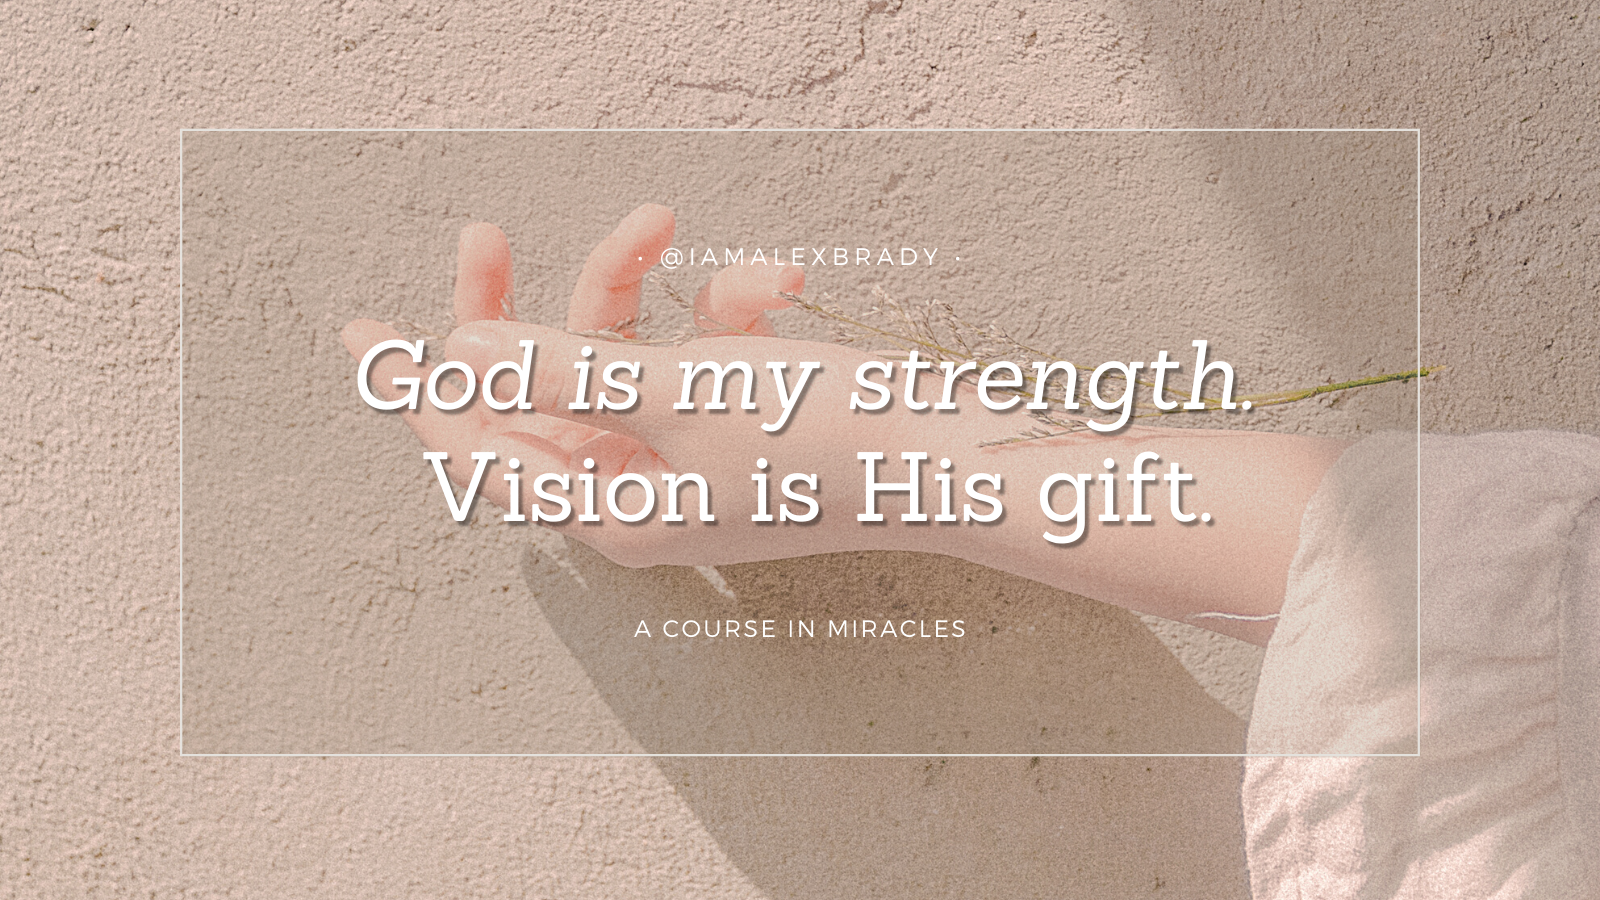 god is my strength. vision is his gift.